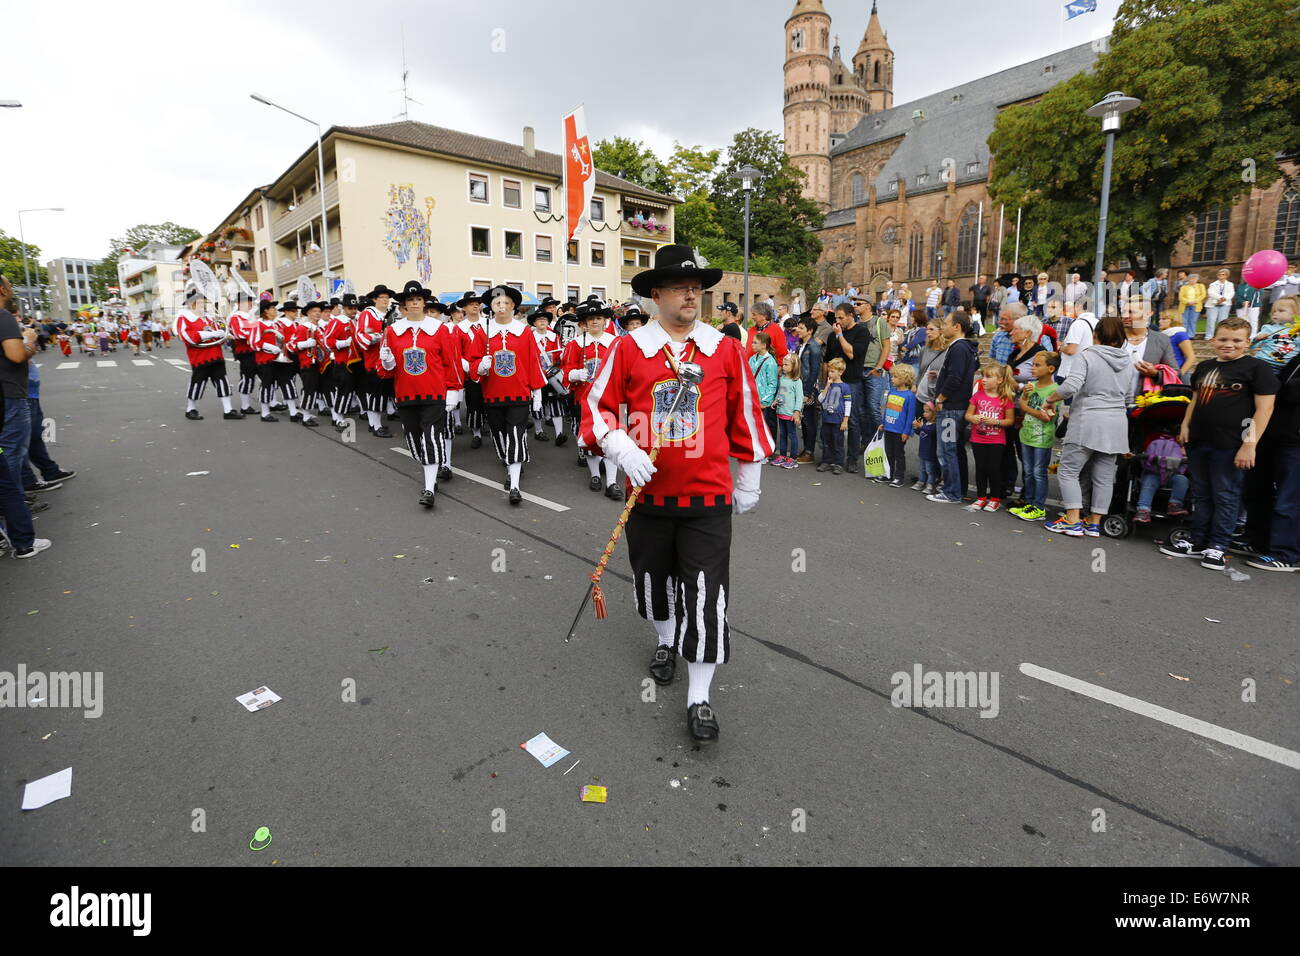 Worms, Germany. 31st Aug, 2014. Members of the Fanfaren- und Spielmannszug Altenstadt e.V. march in the Backfischfest parade 2014. The first highlight of this year's Backfischfest was the big parade through the city of Worms with 125 groups and floats. Community groups, sport clubs, music groups and business from Worms and further afield took part. © Michael Debets/Pacific Press/Alamy Live News Stock Photo